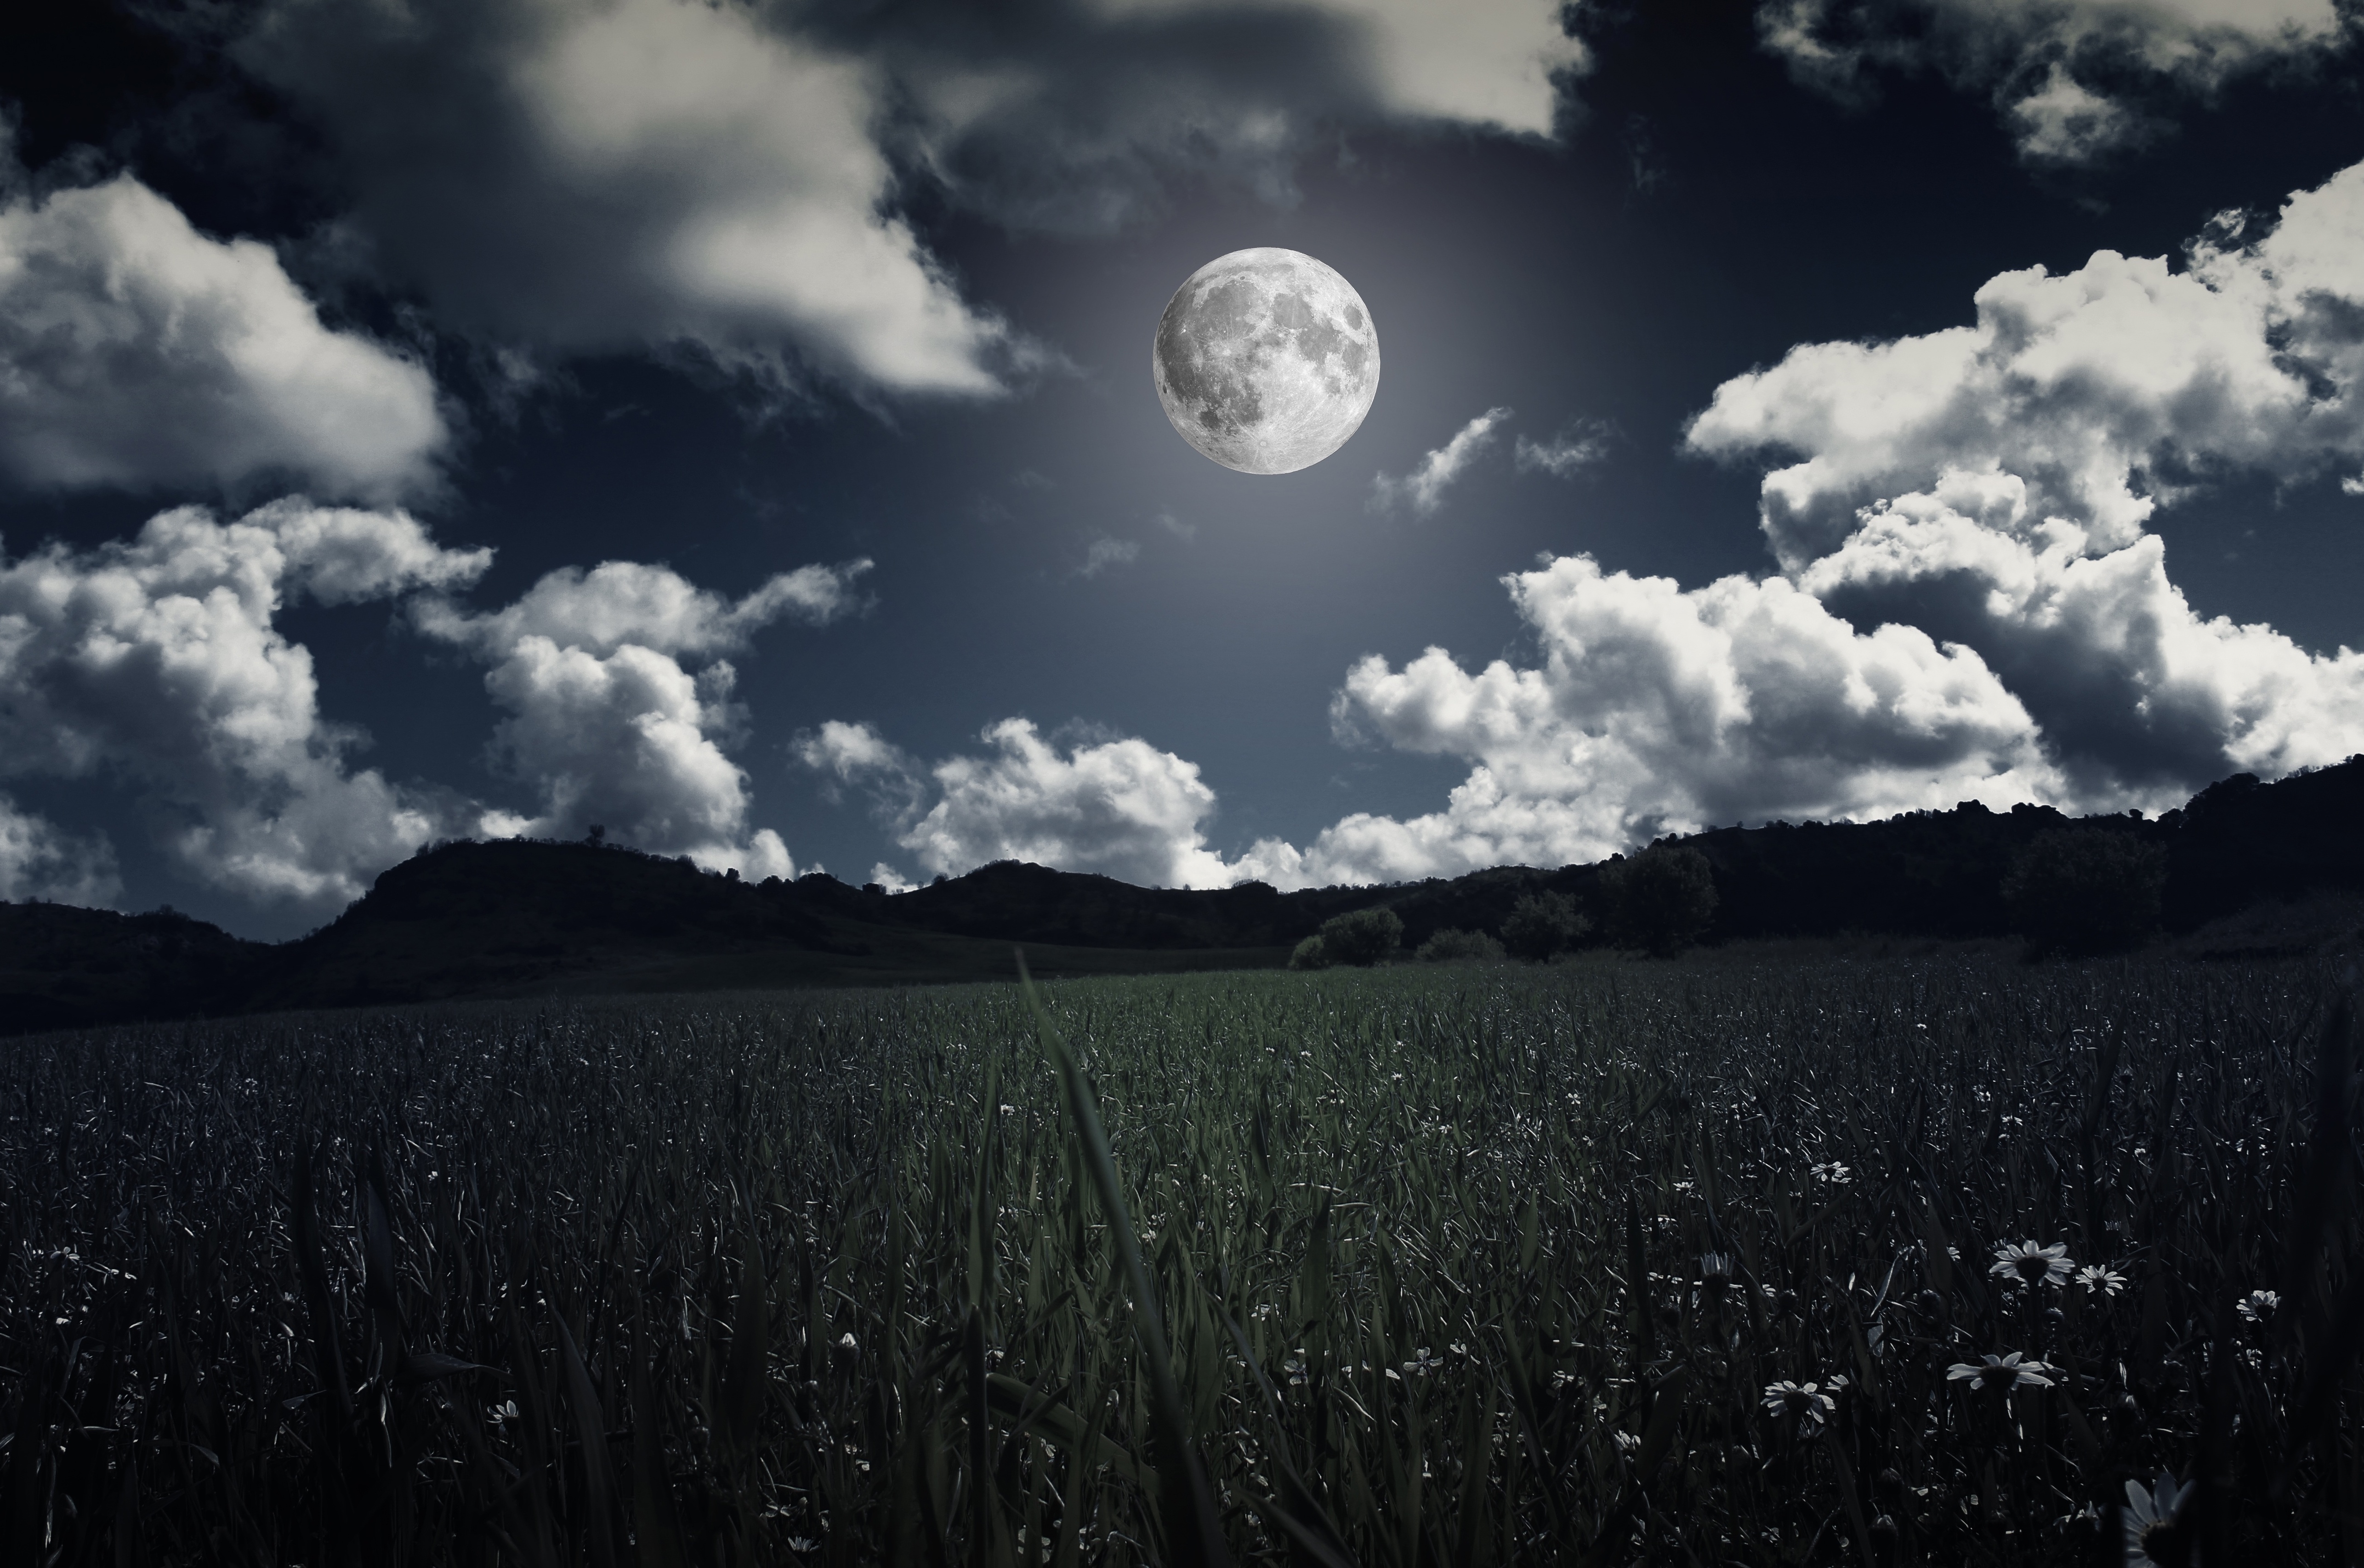 moon, full moon, grass, nature, clouds, field, photoshop images